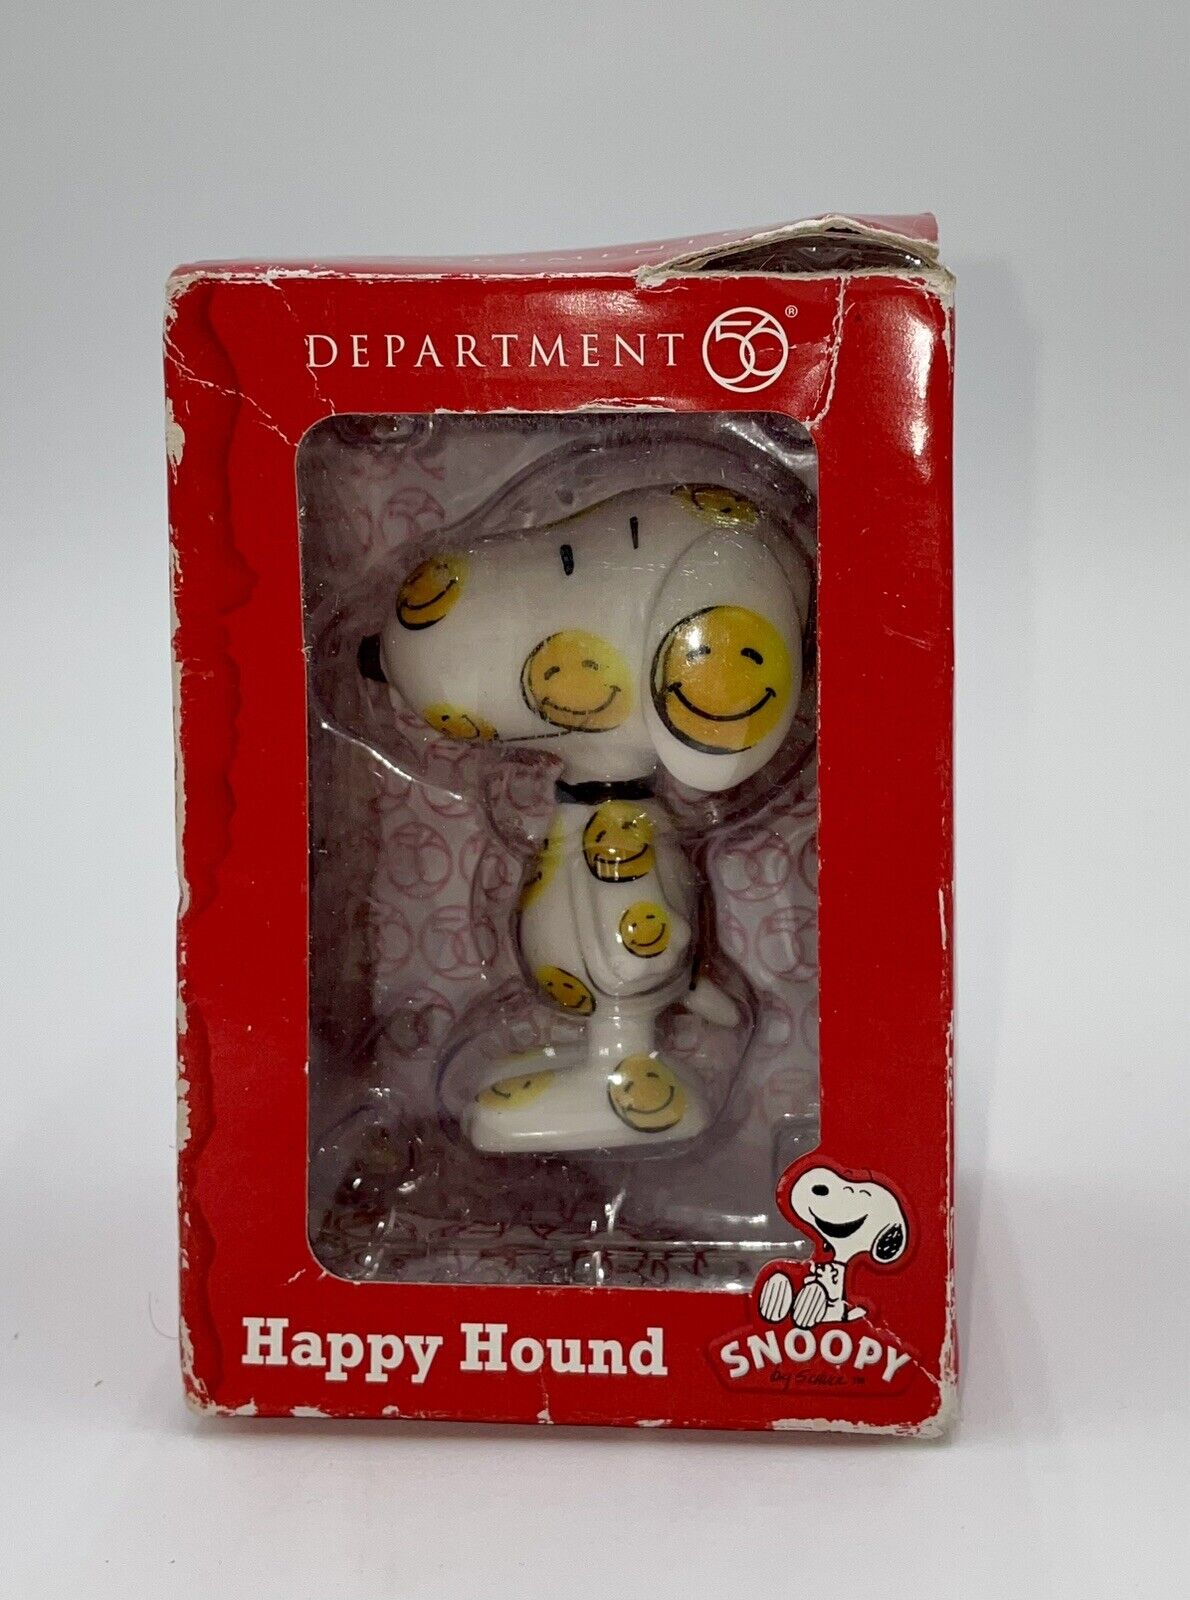 Department 56 Peanuts Snoopy Happy Hound Figurine Smiley Face Snoopy by Design